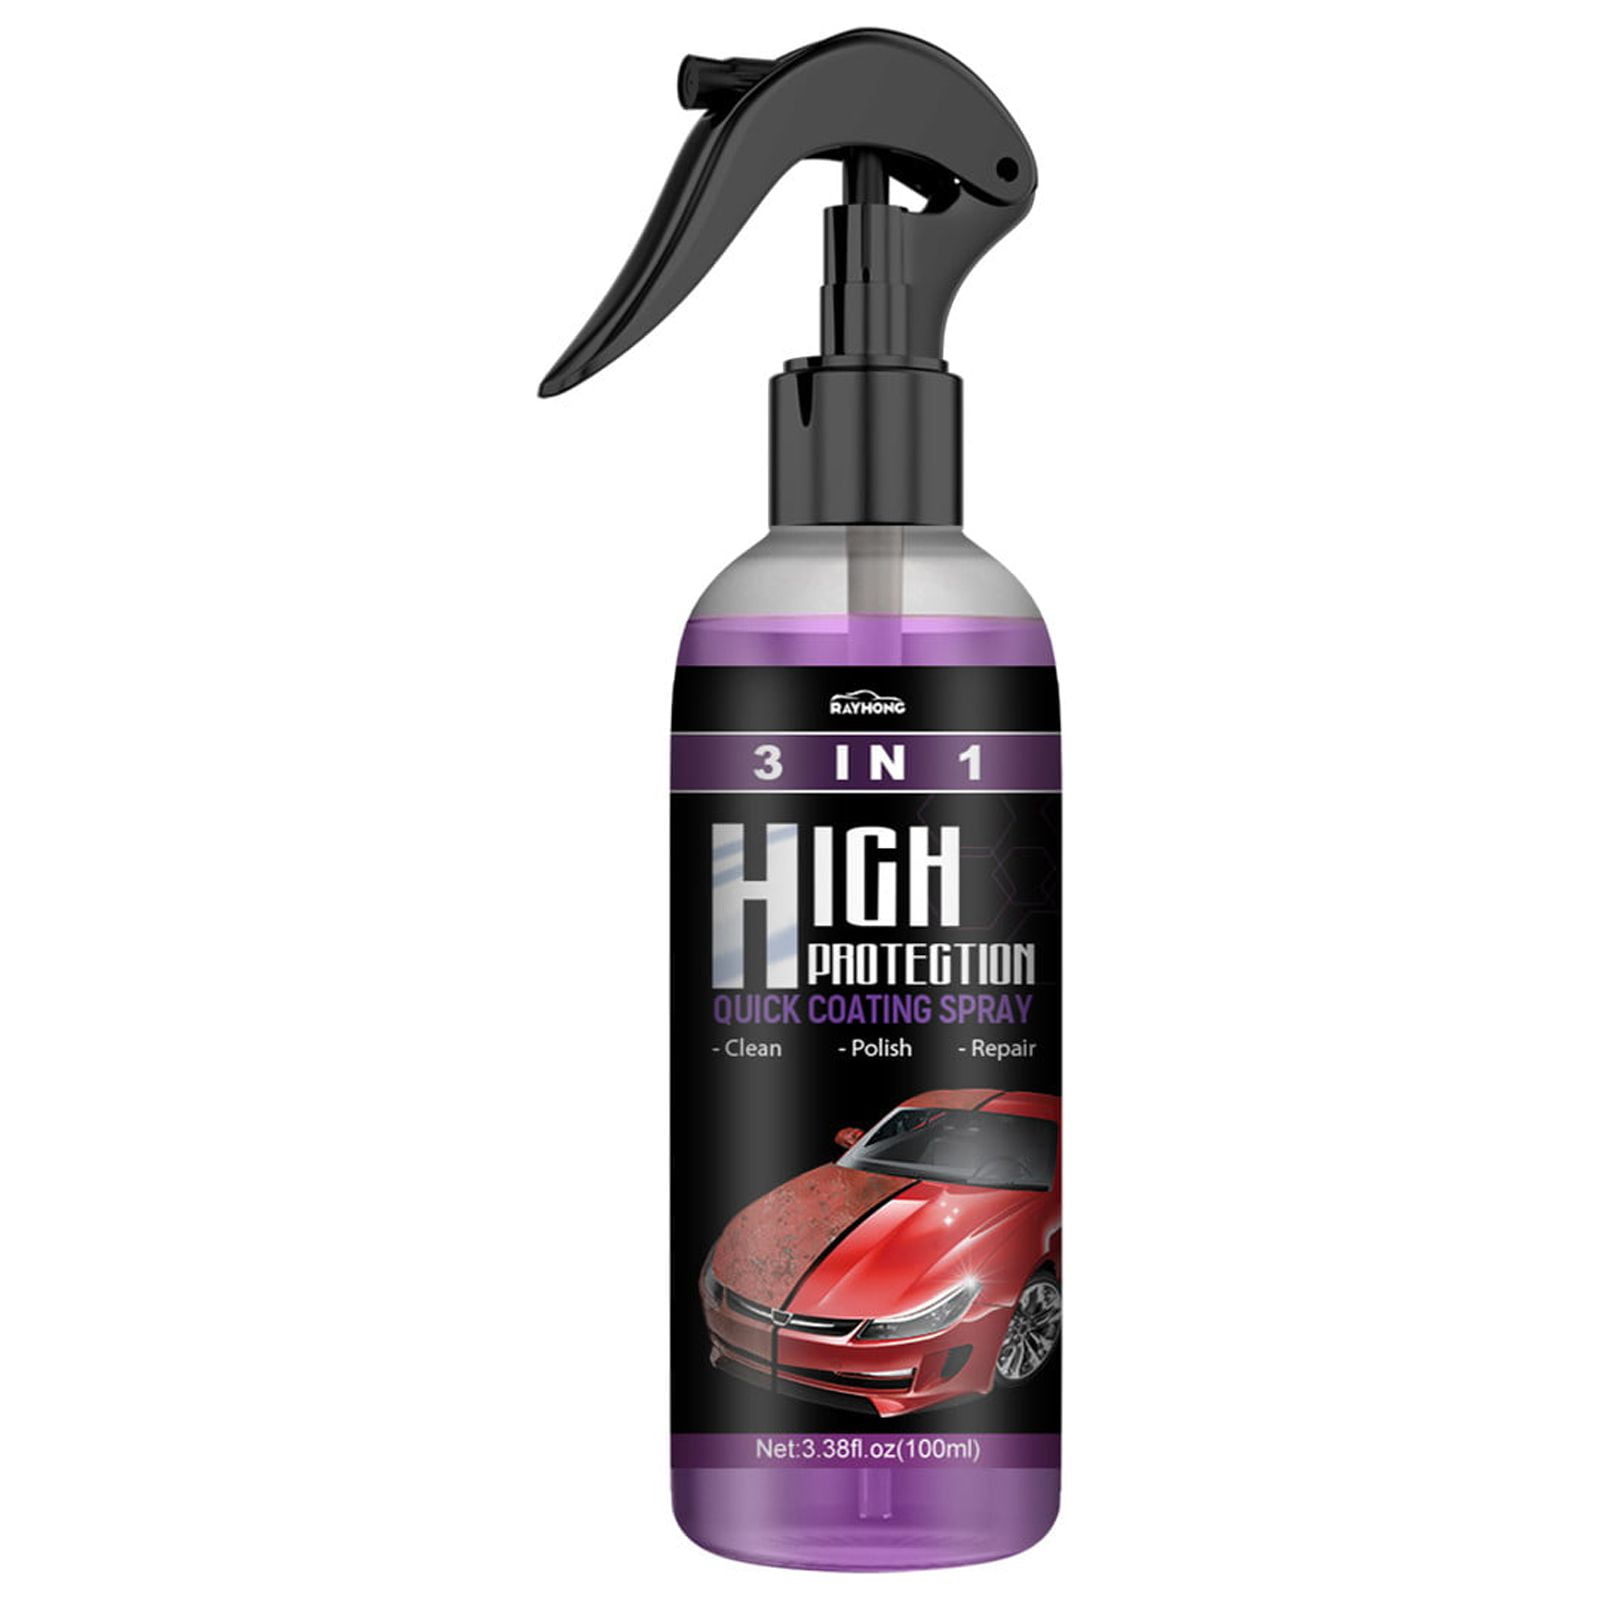 3 In 1 High Protection Quick Car Coating Spray, Ceramic Car Spray, Ceramic  Coating Spray, Newbeeoo Car Coating Spray, 3-In-1 High Protection Car Spray